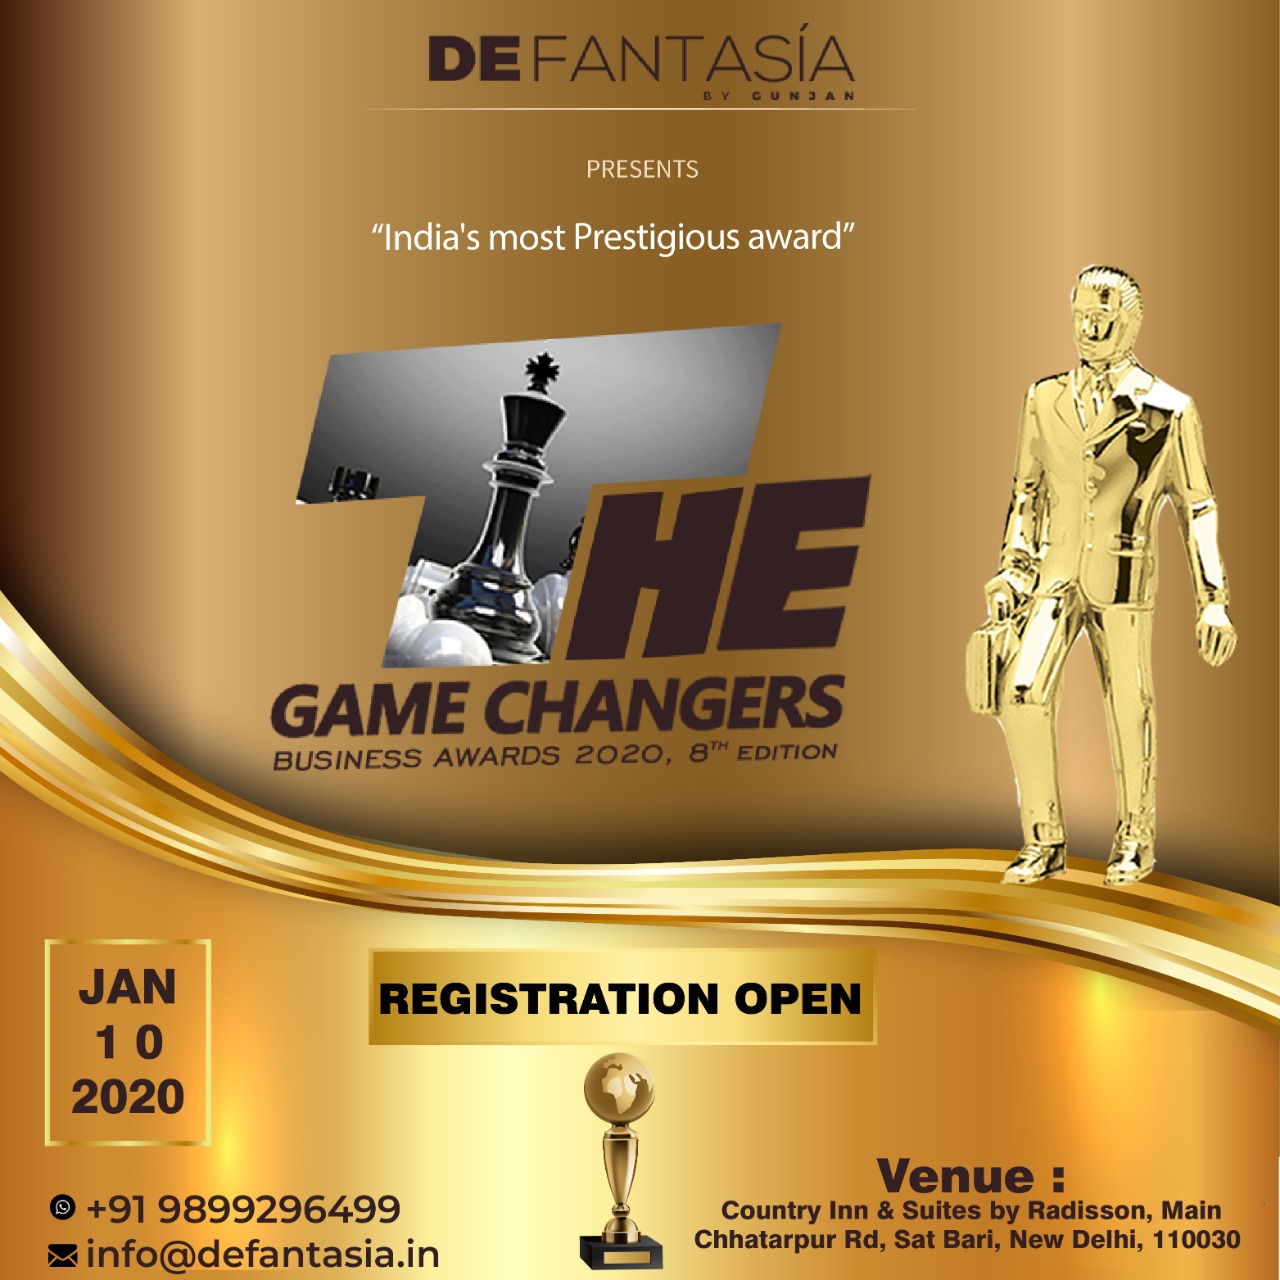 India's Game Changers Business Awards 2020 8th Edition, North West Delhi, Delhi, India